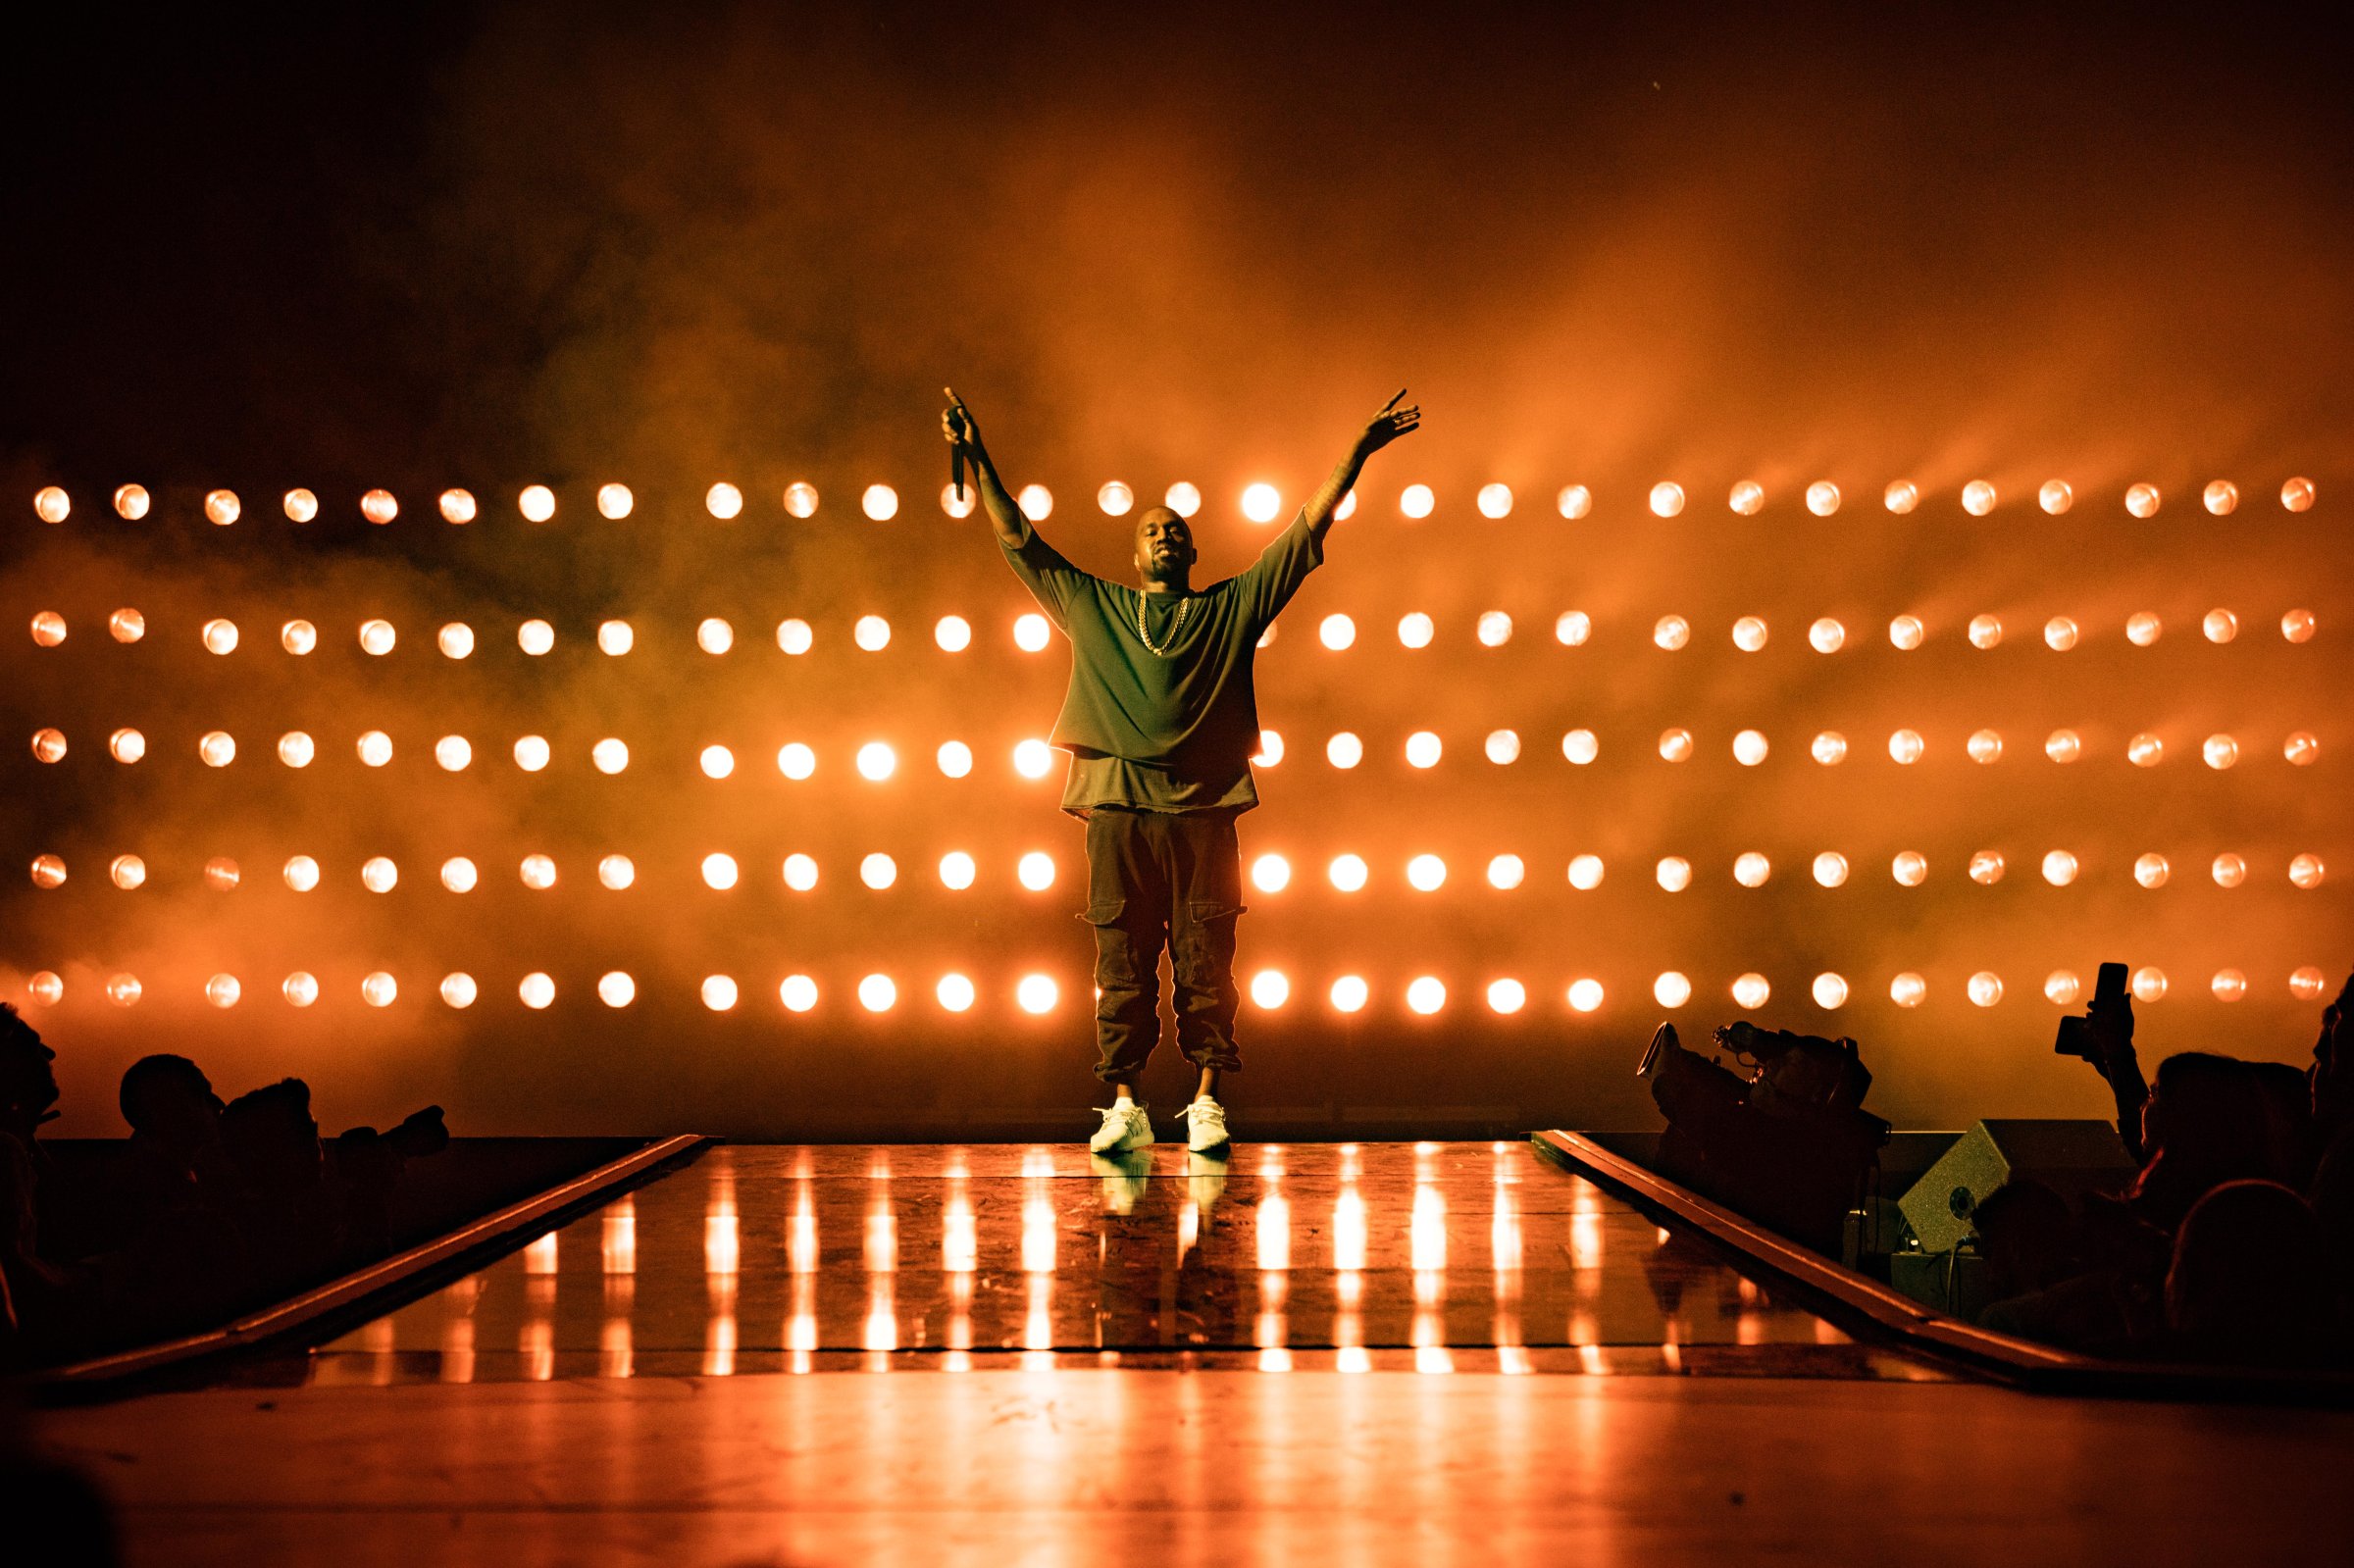 Kanye West performs onstage at the 2015 iHeartRadio Music Festival at MGM Grand Garden Arena on September 18, 2015 in Las Vegas, Nevada.